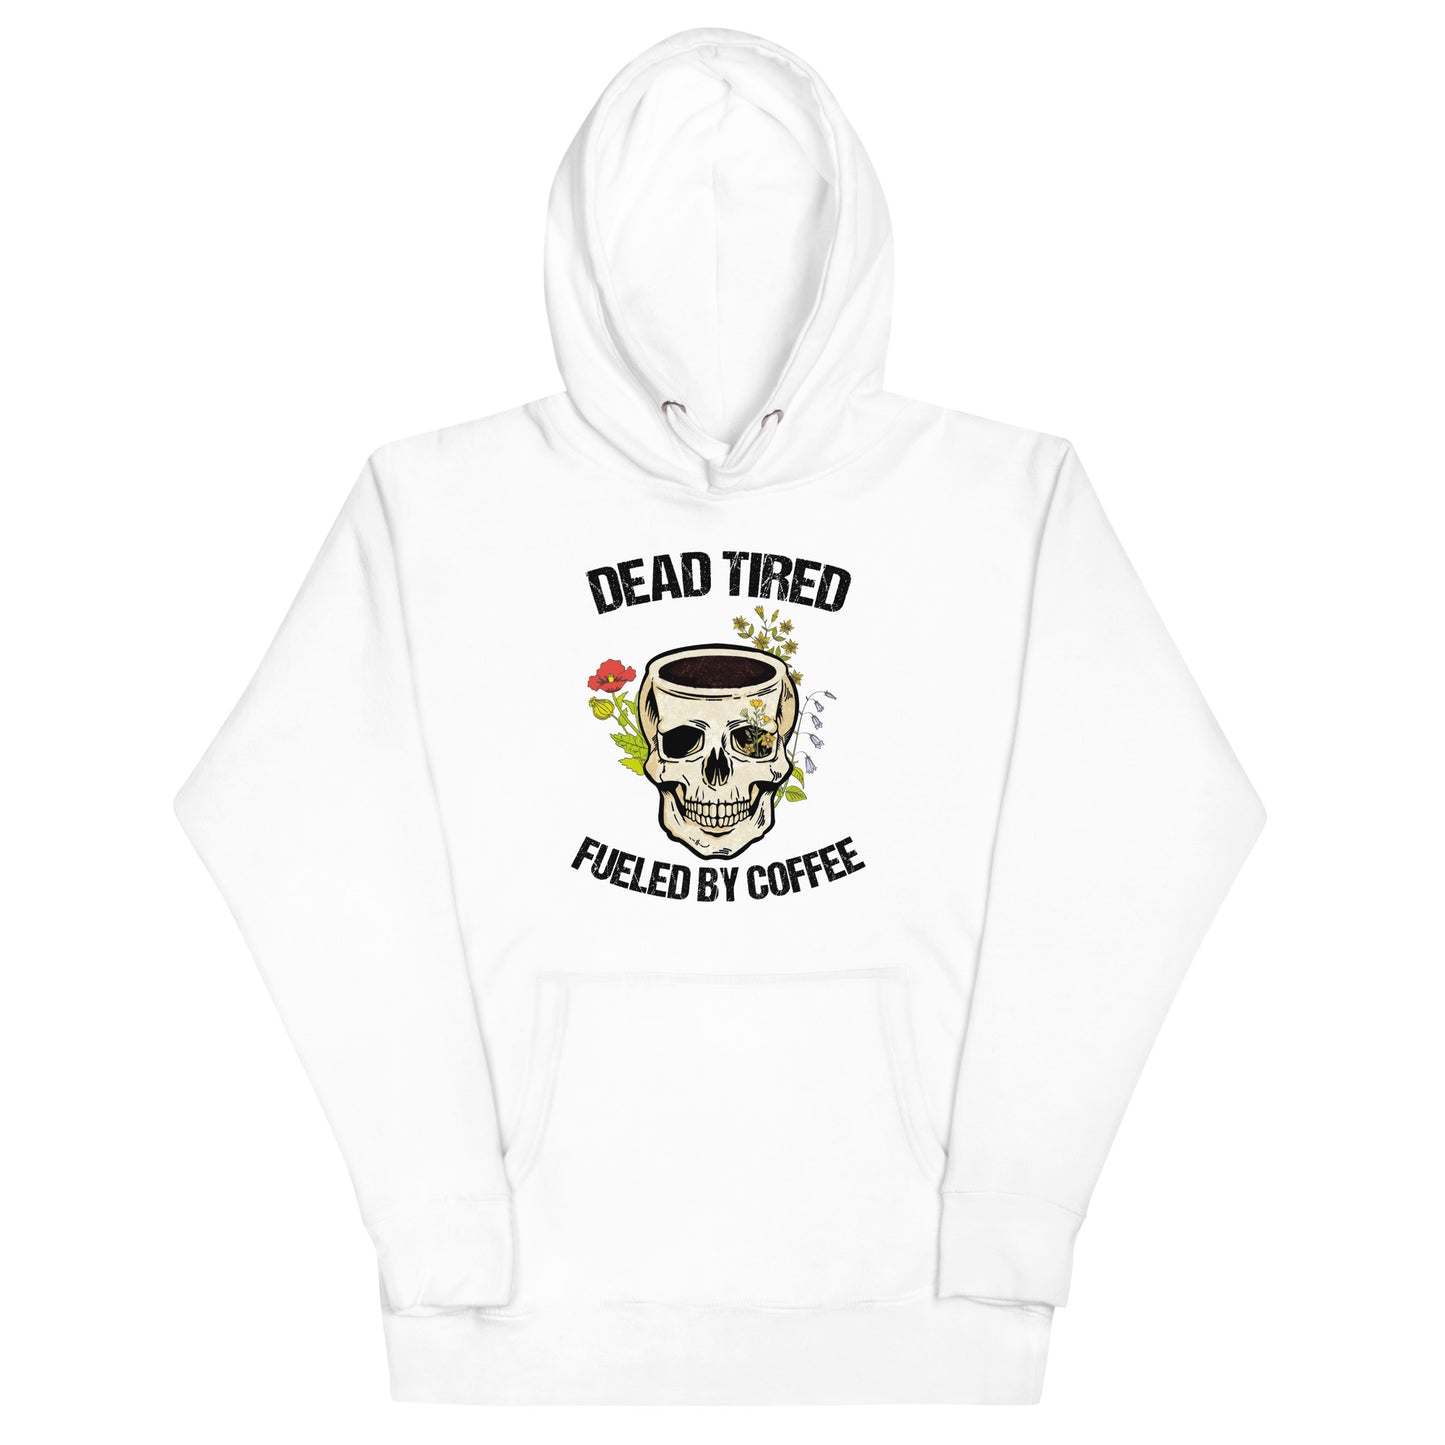 Fueled by Coffee Premium Cotton Hoodie